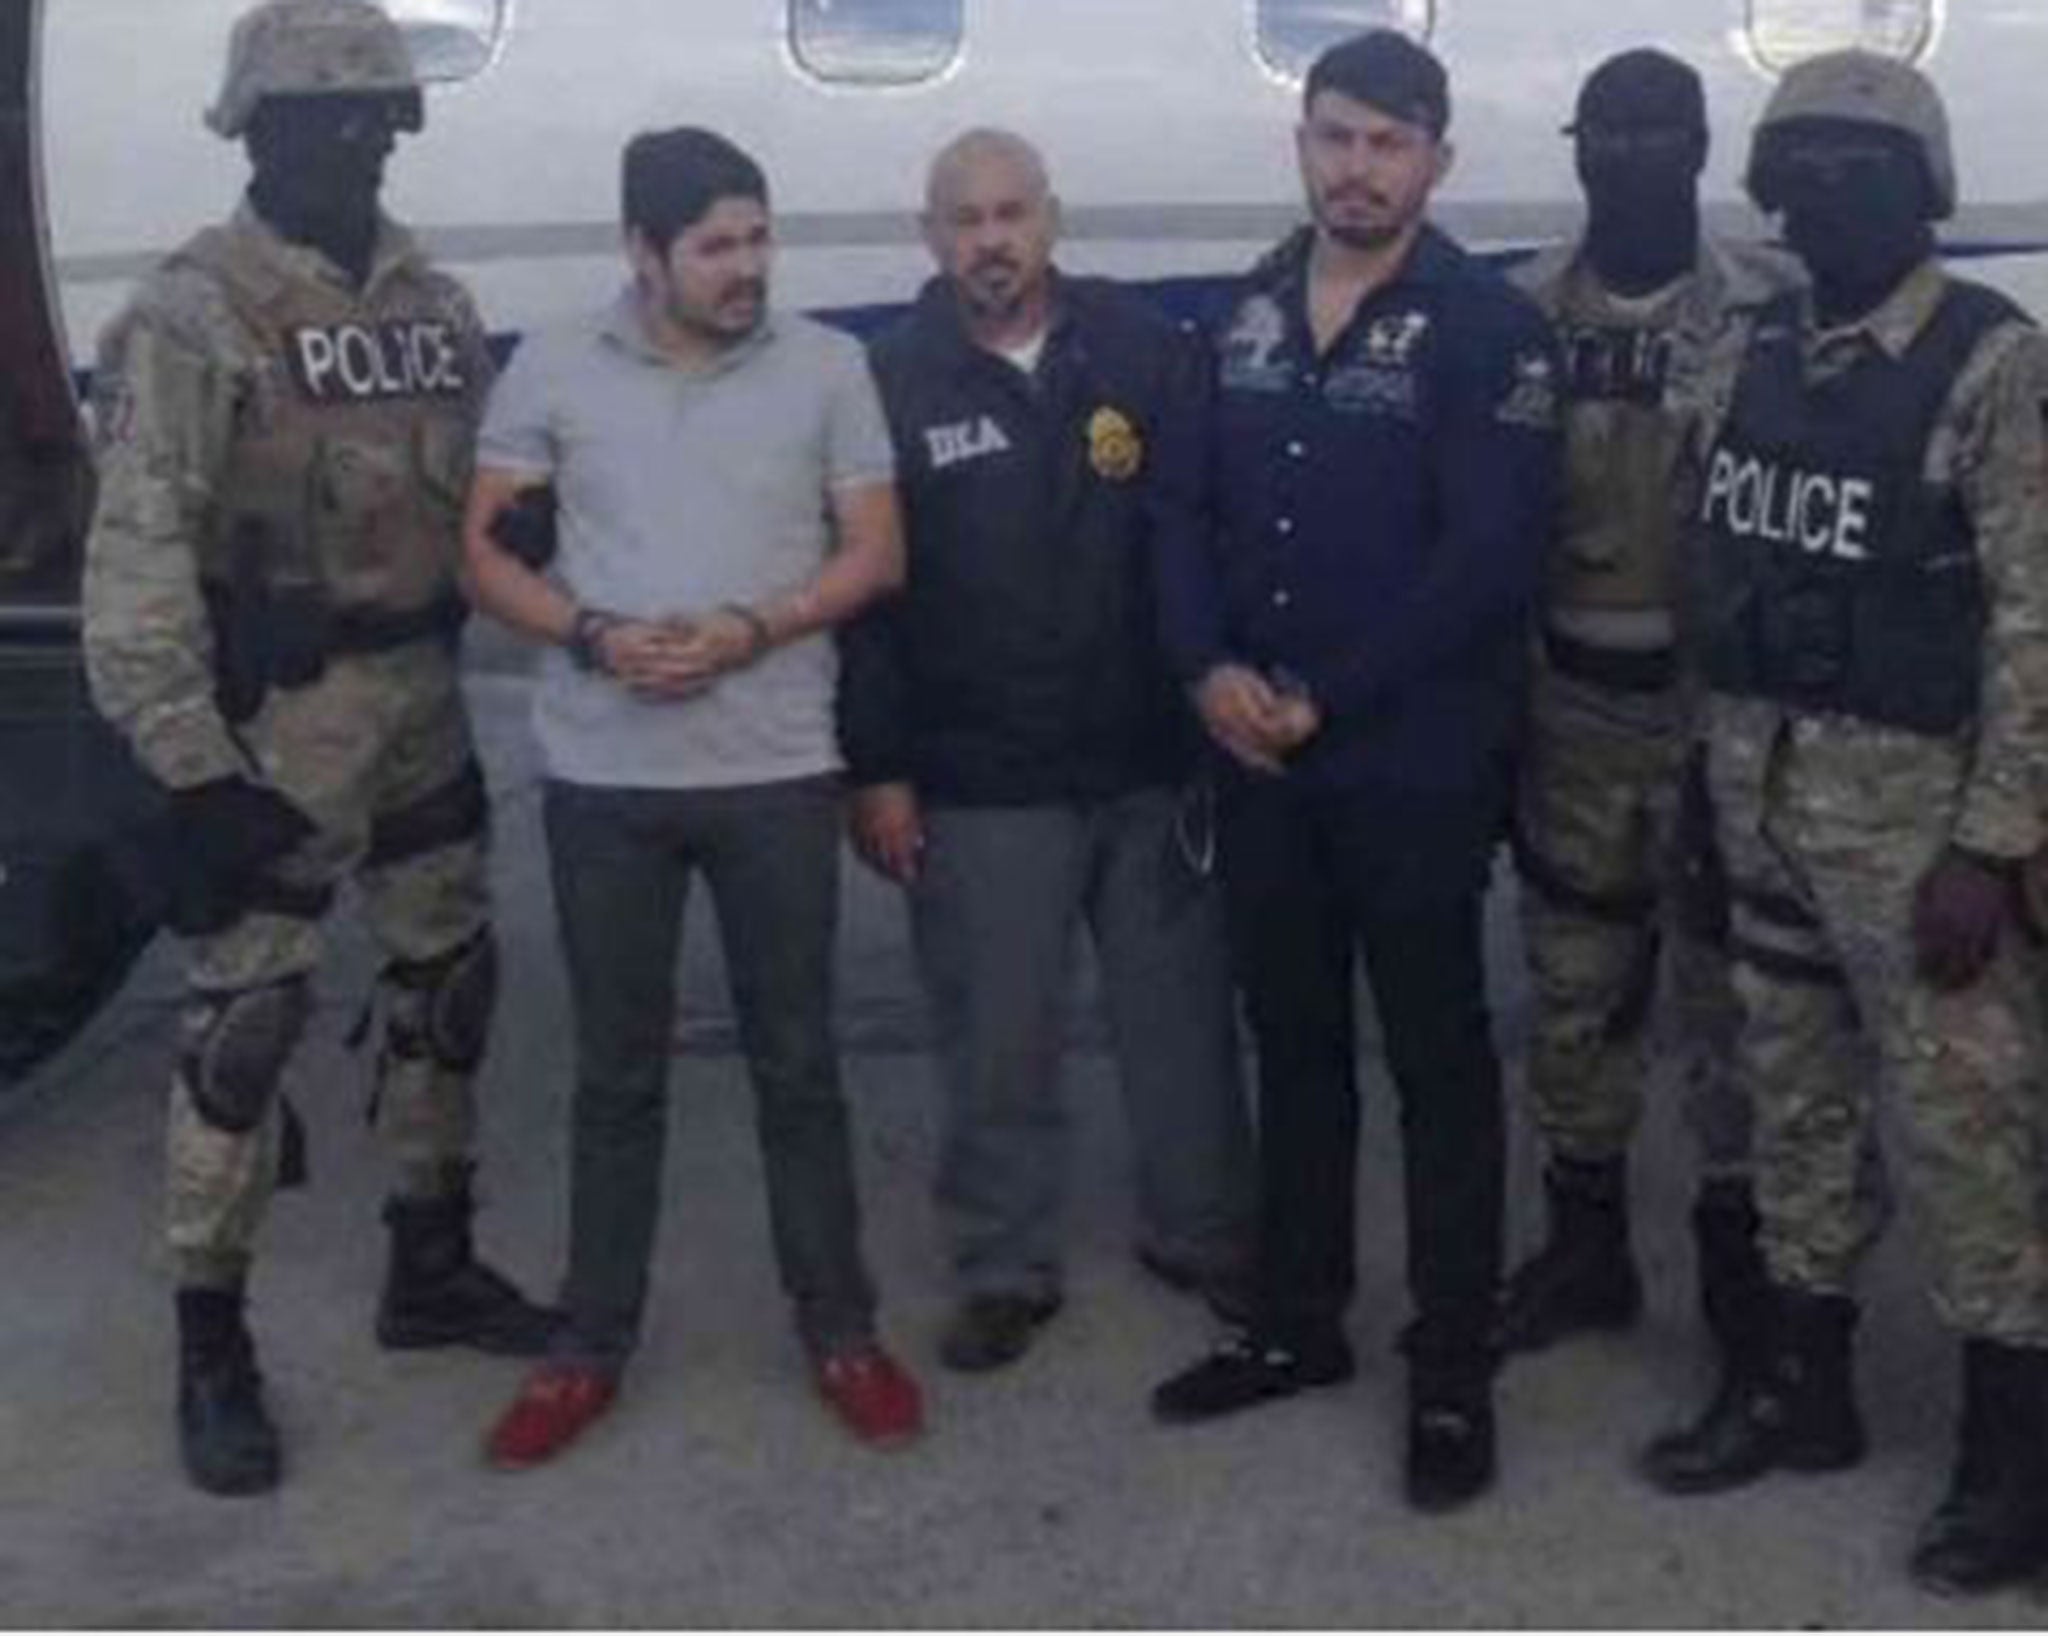 Efrain Campo and Francisco Flores were arrested last November in Haiti